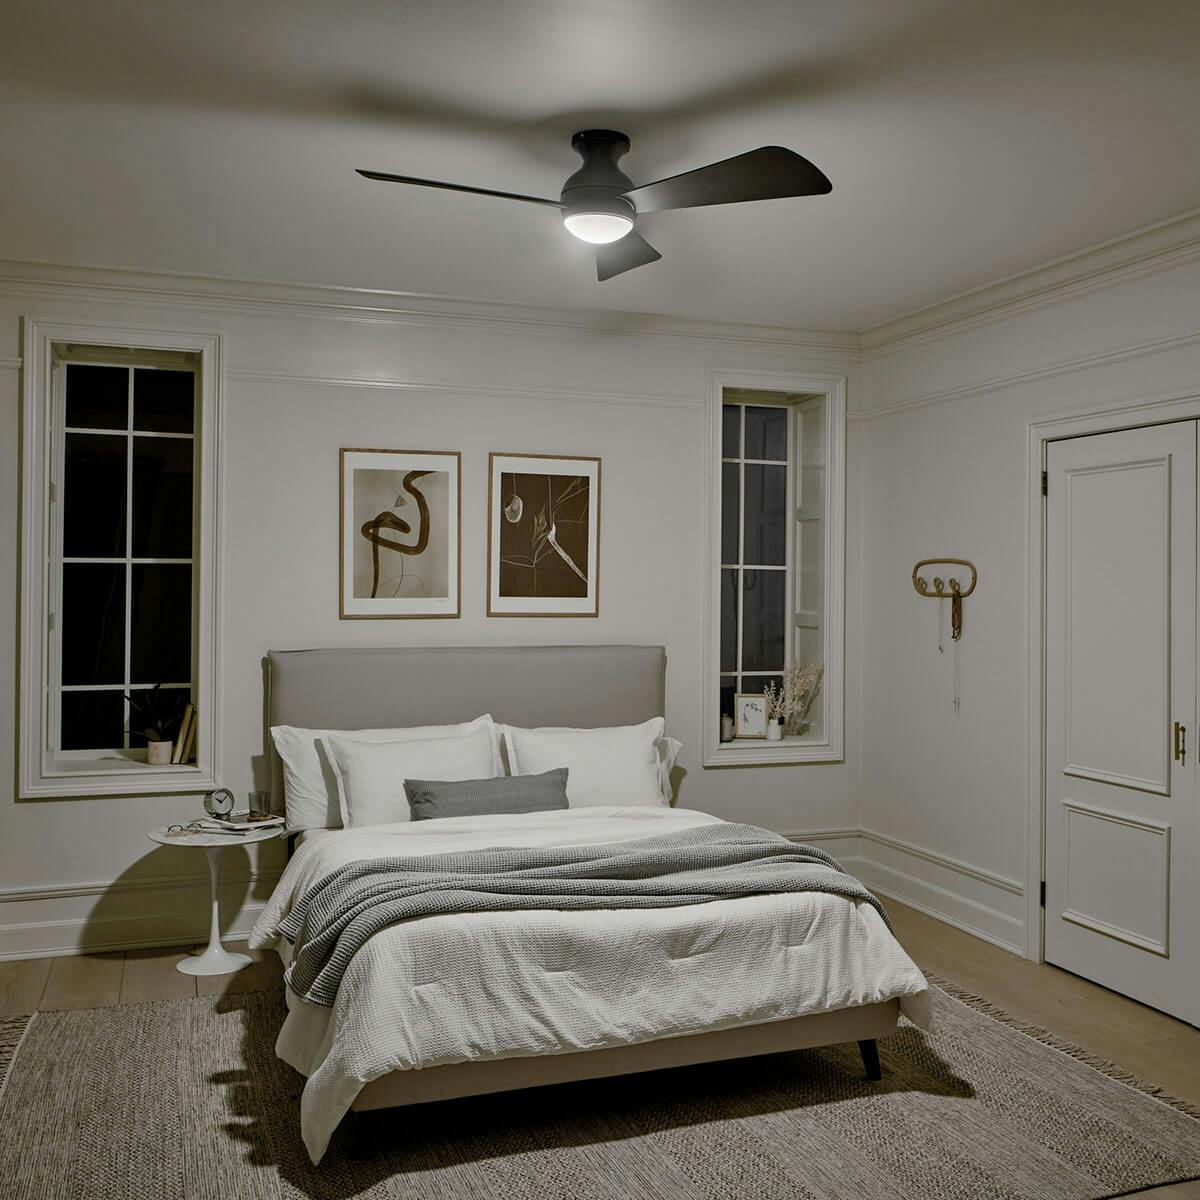 Night timebedroom image featuring Sola 330152OZ